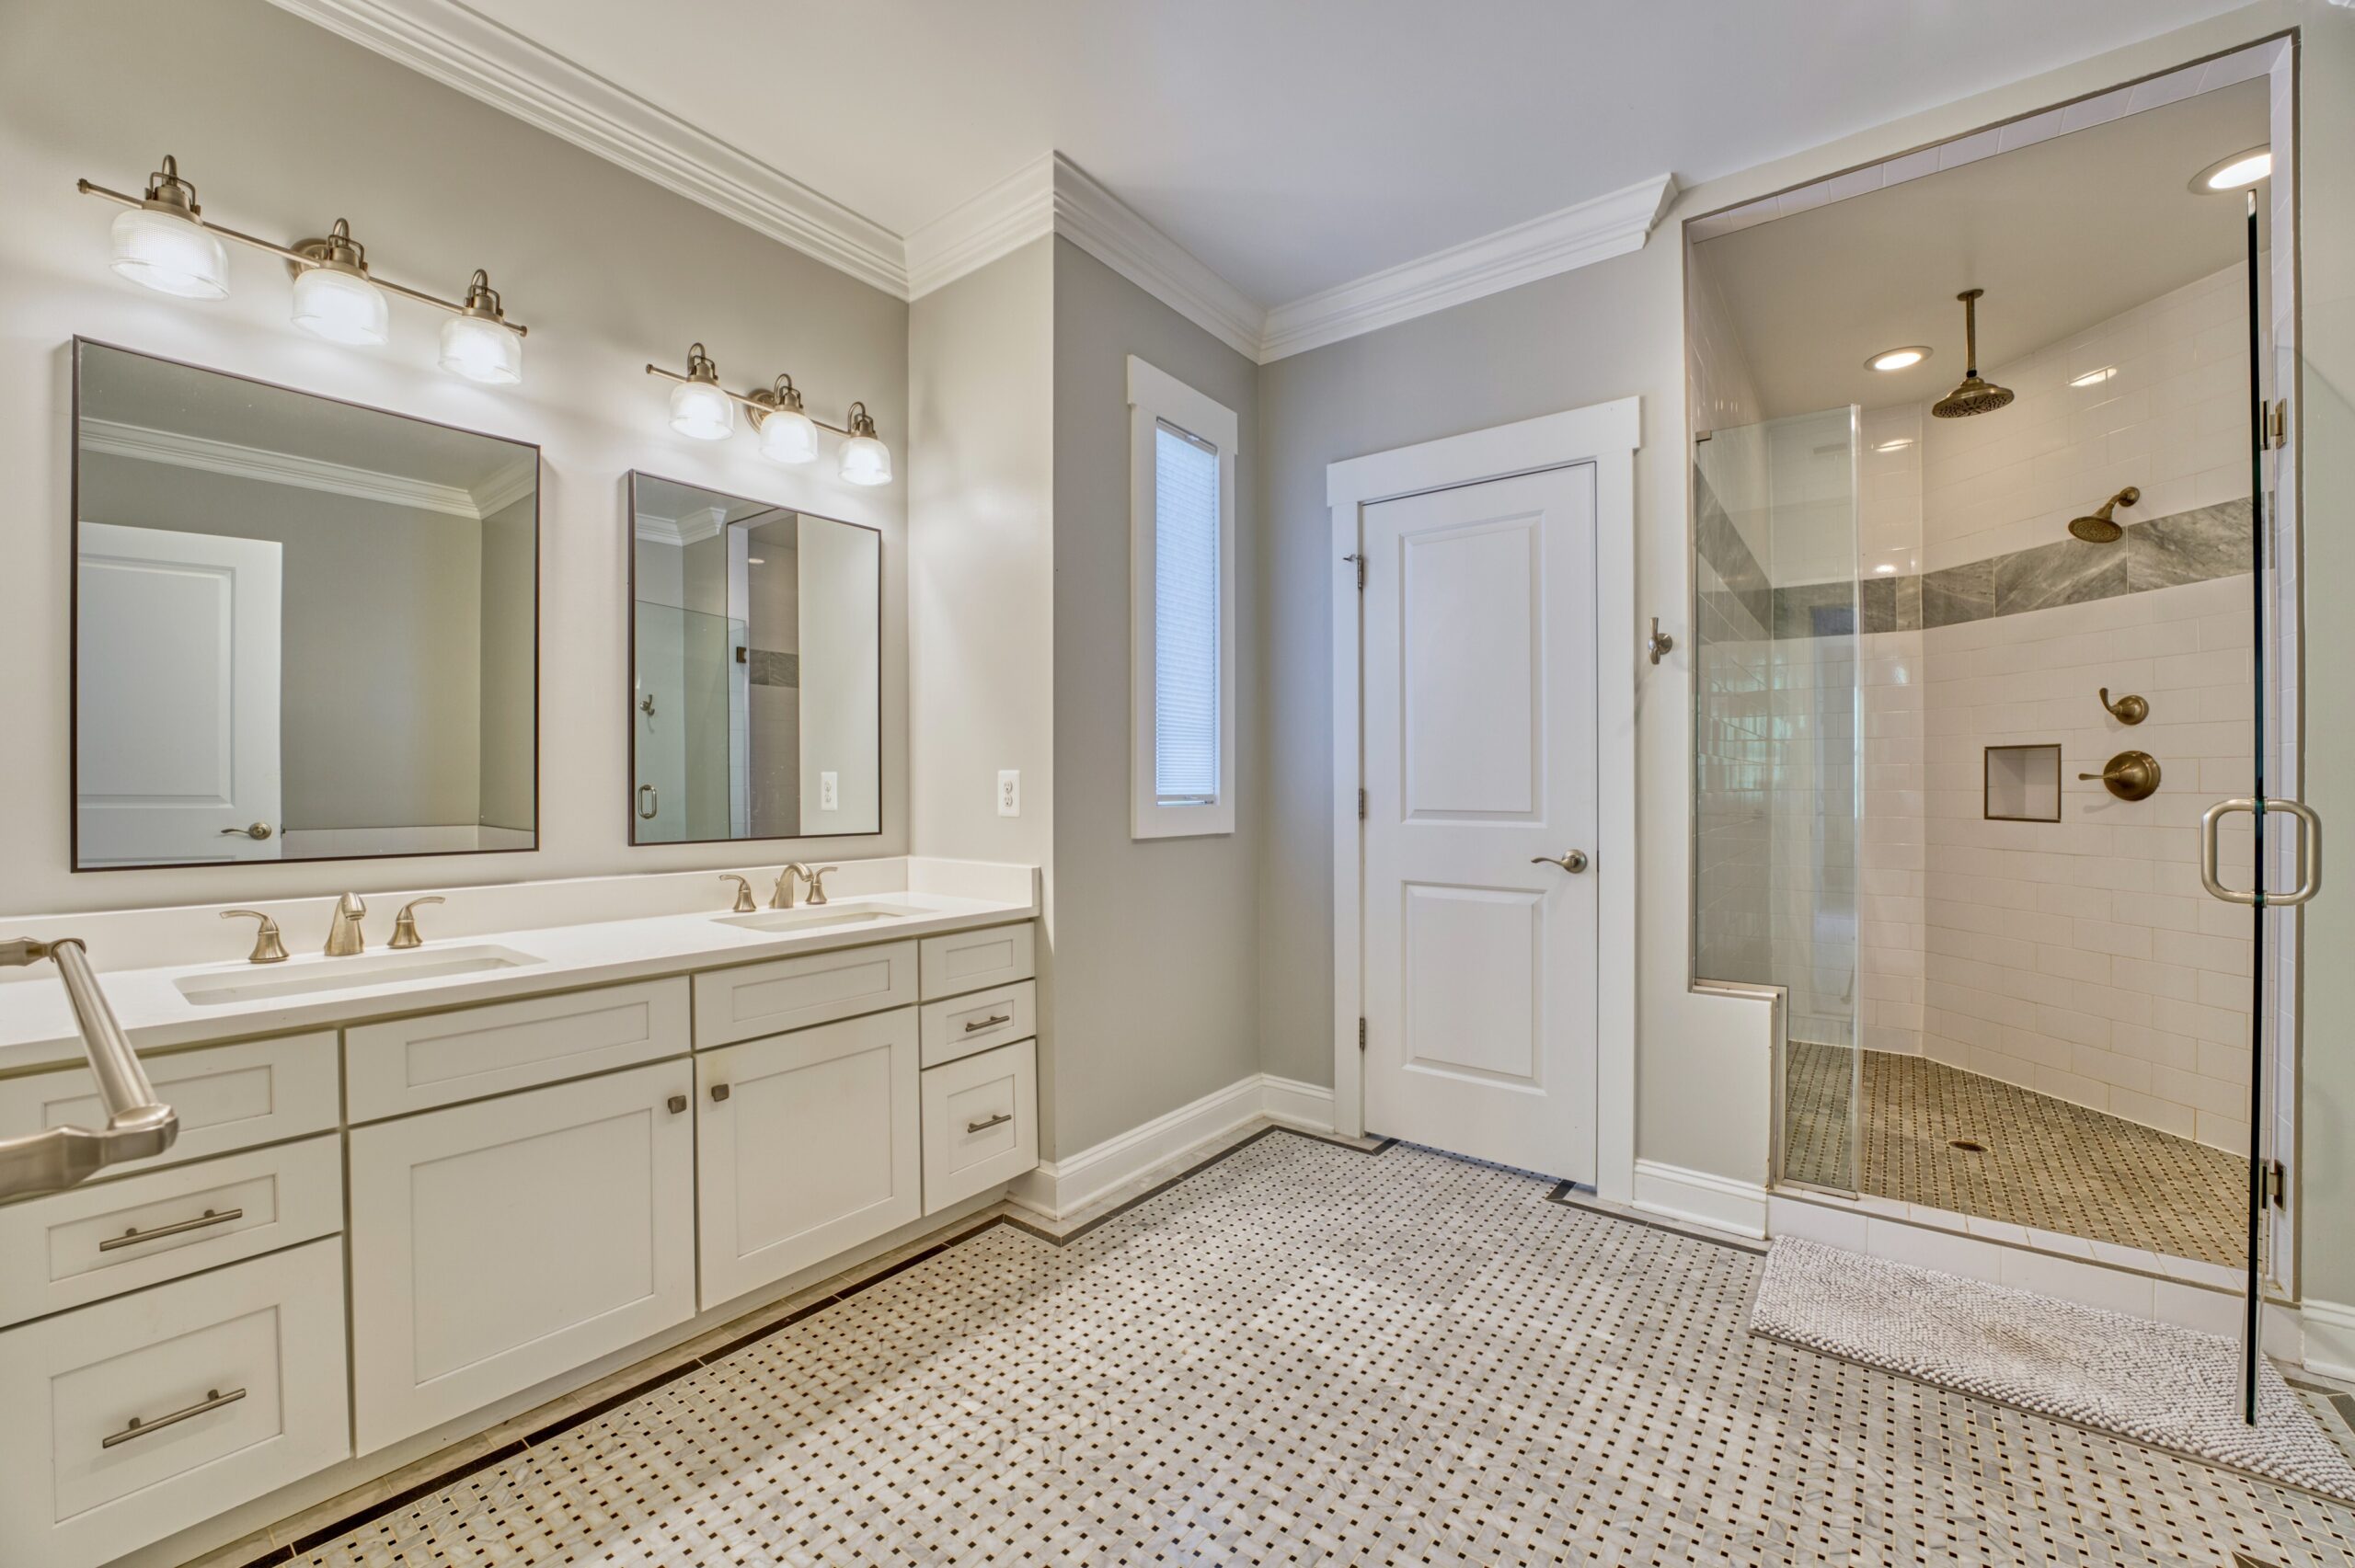 Professional interior photo of 505 N West St - showing the primary bathroom with dual vanity, private commode door next to the large shower with rain head